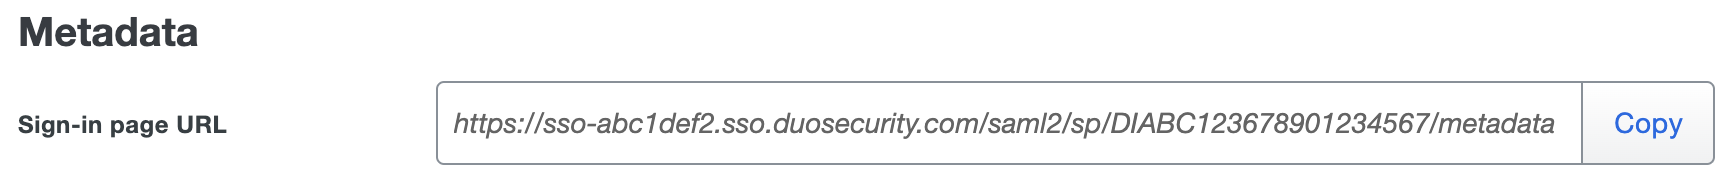 Duo Asana Sign-in Page URL